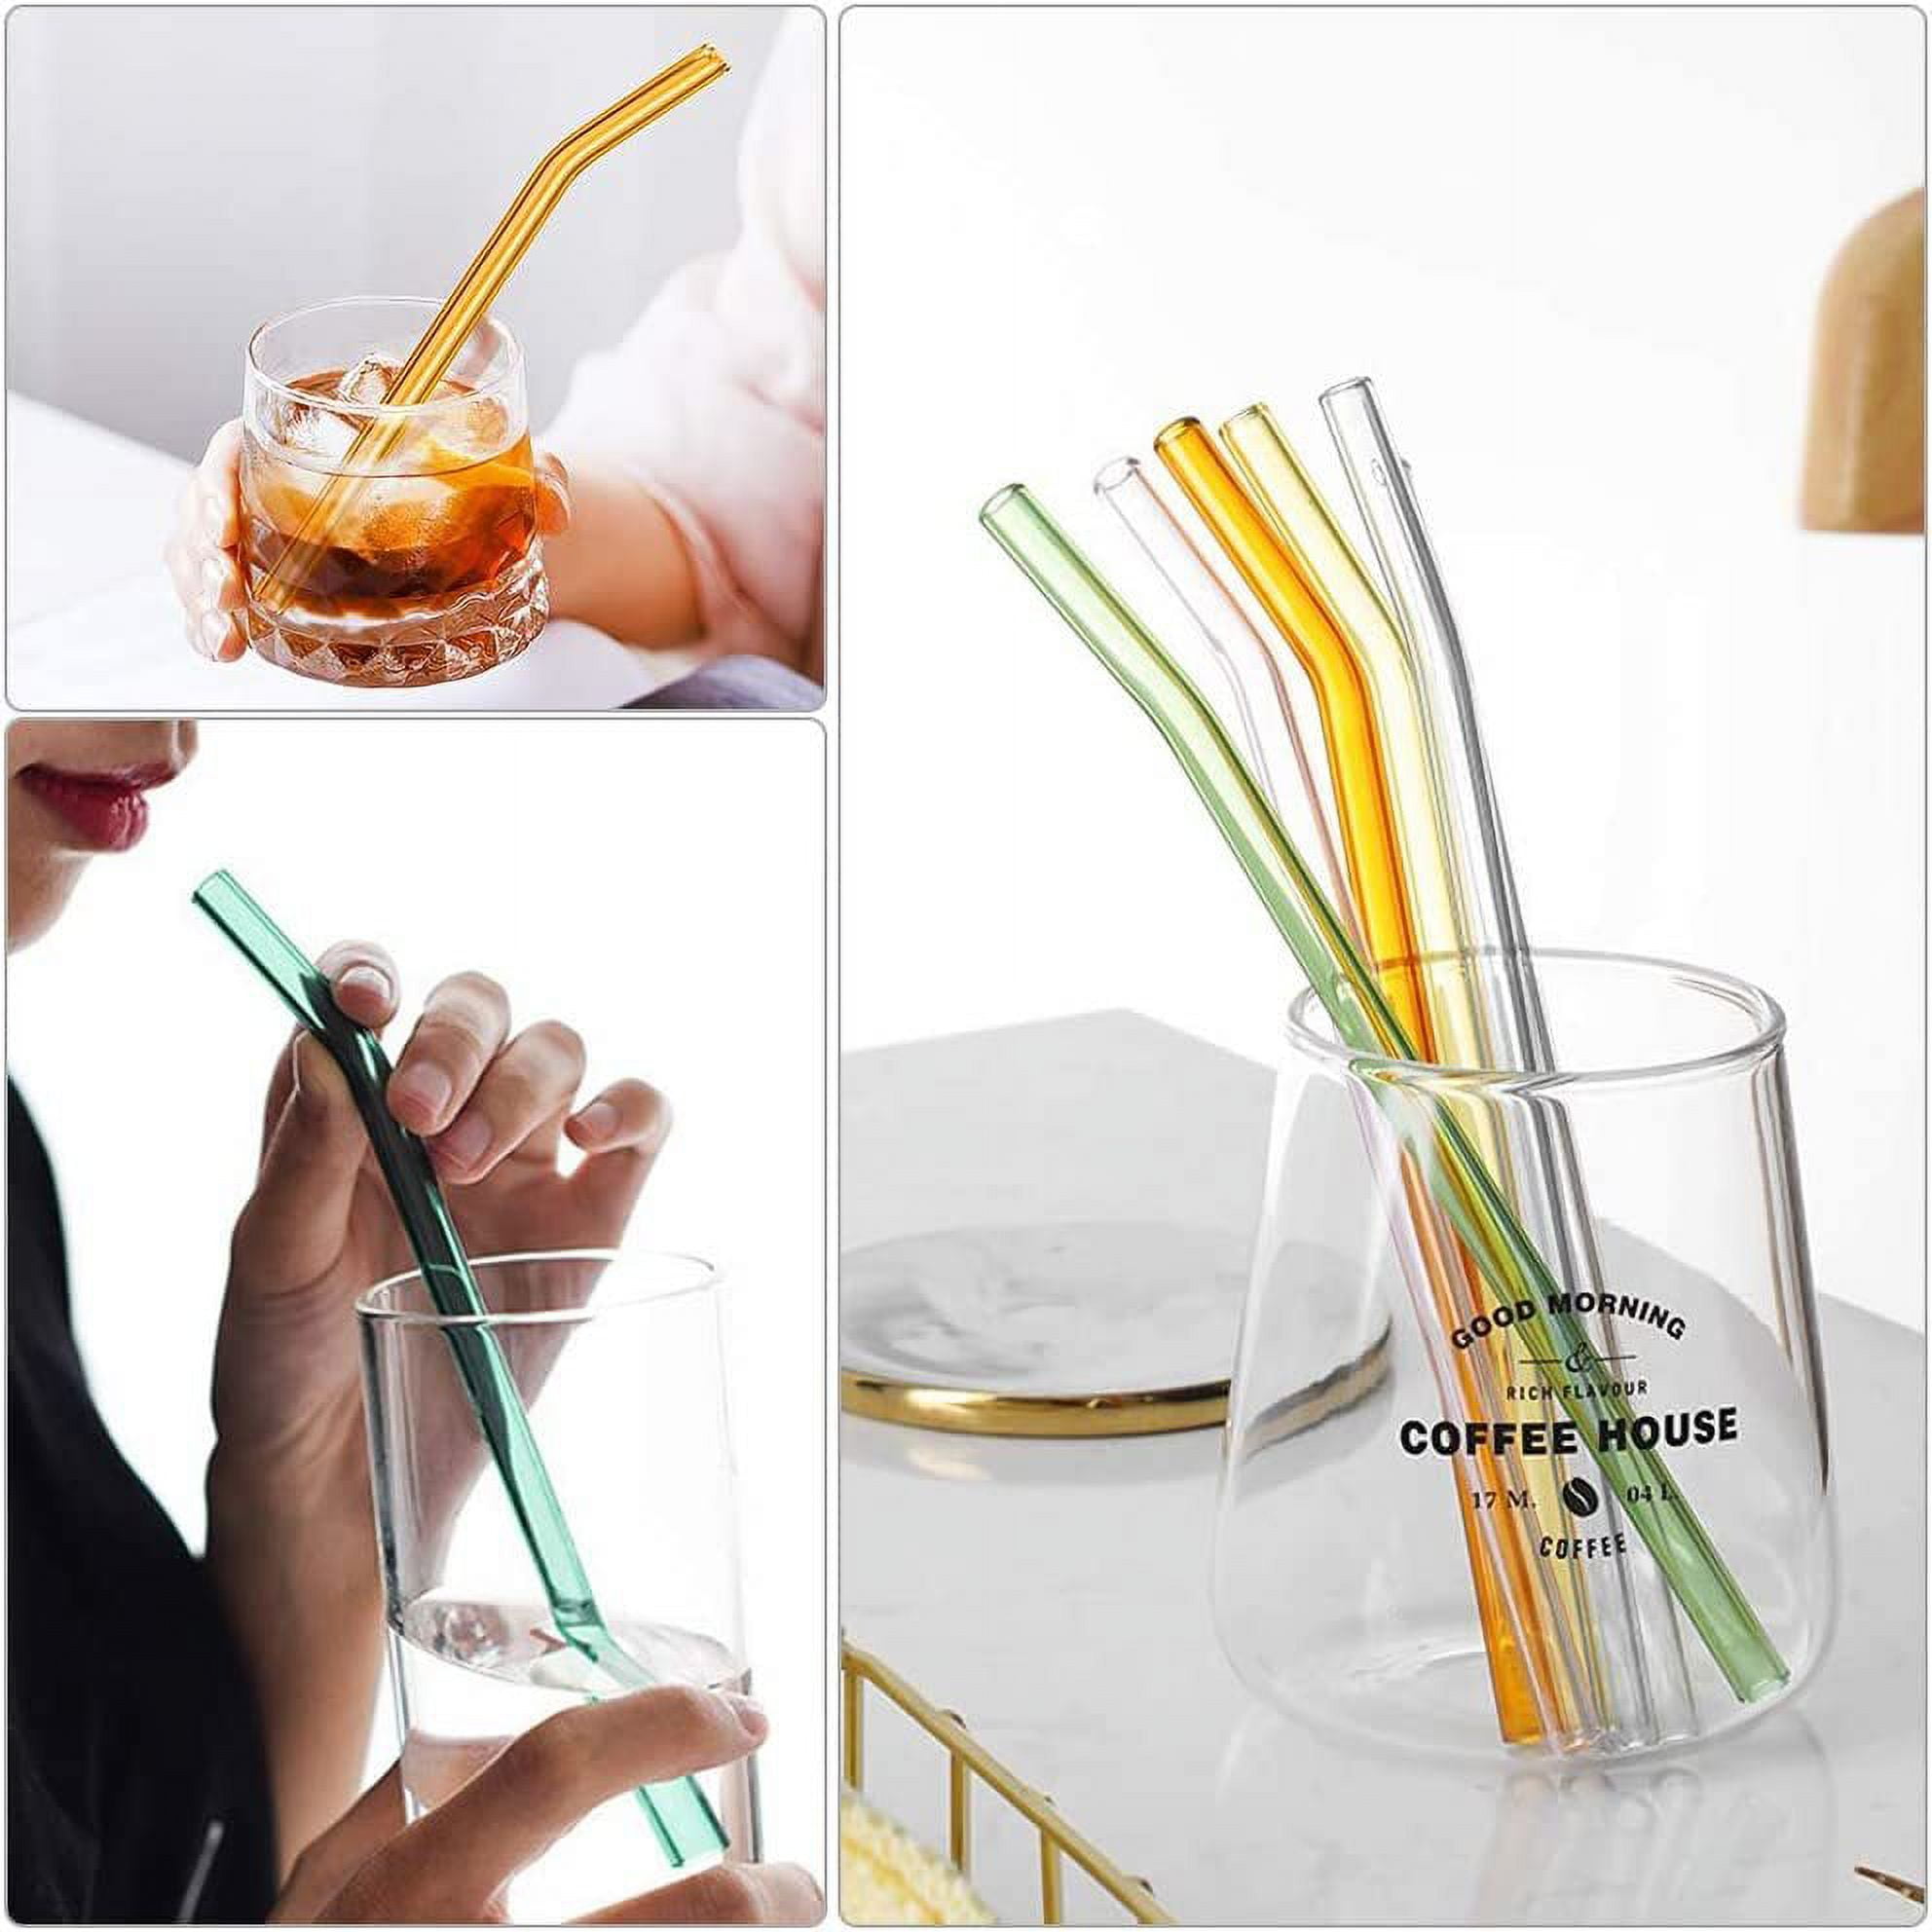 8 Pack Reusable Glass Drinking Straws - 10 inch x 10 mm - Smoothie Straws for Milkshakes, Frozen Drinks, Smoothies, Bubble Tea - Environmentally